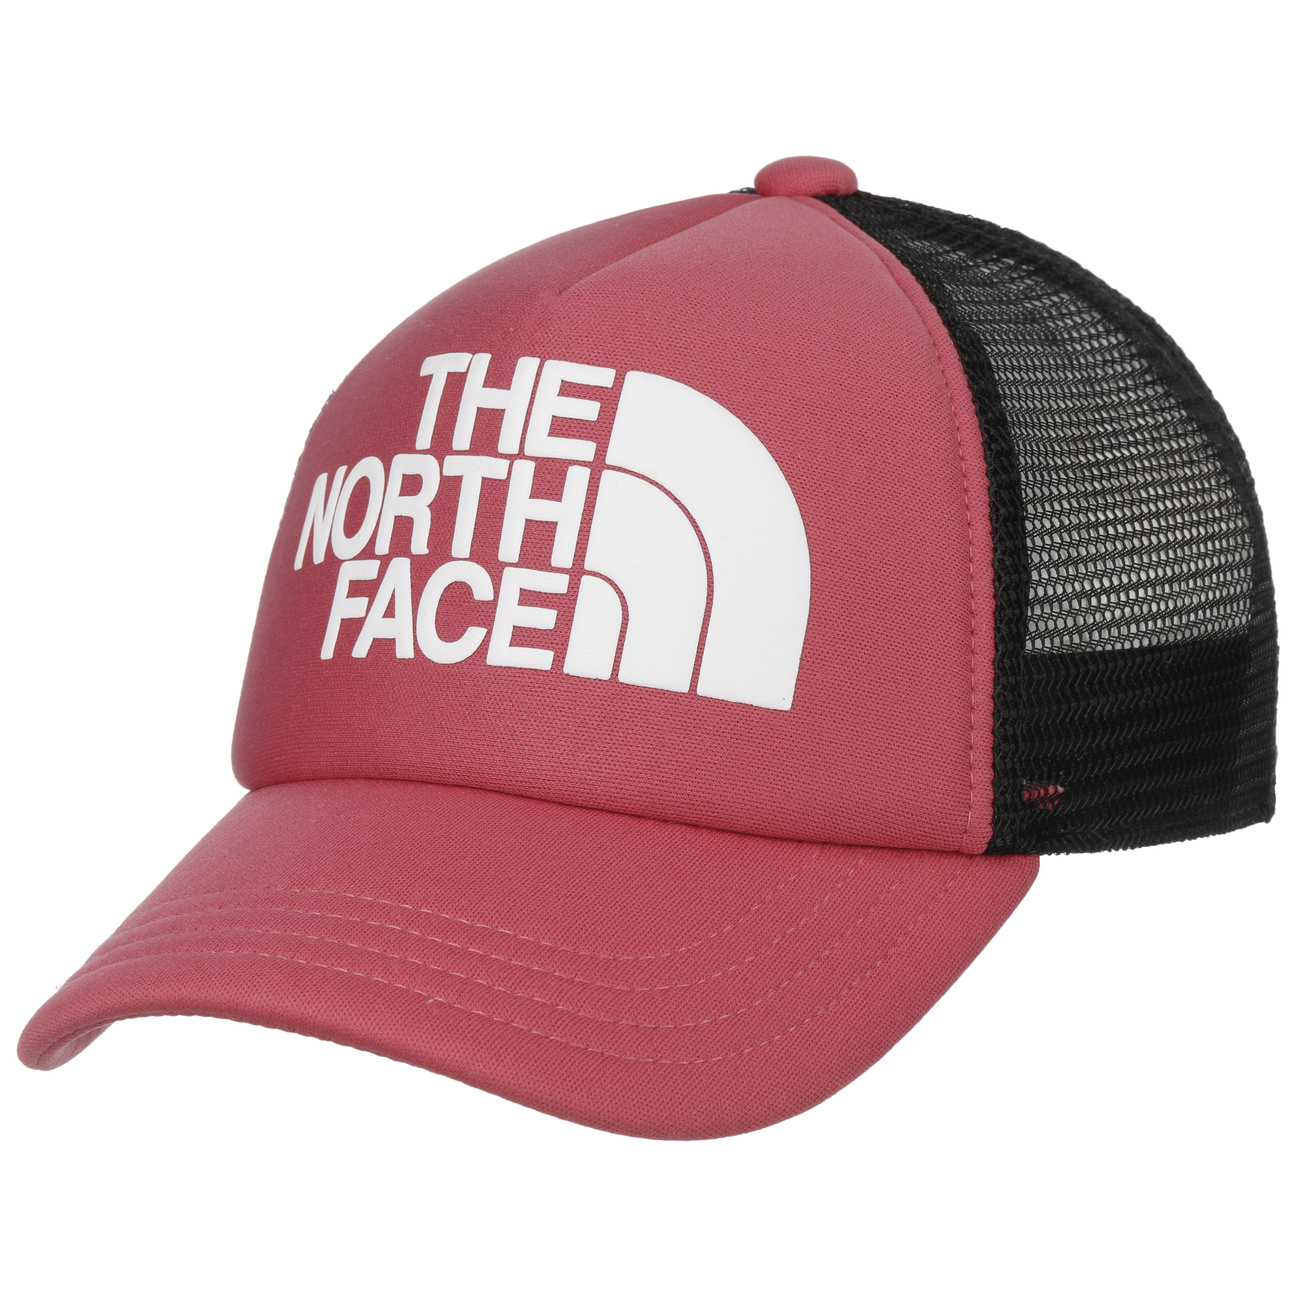 EU Youth Logo Trucker Cap by The North Face